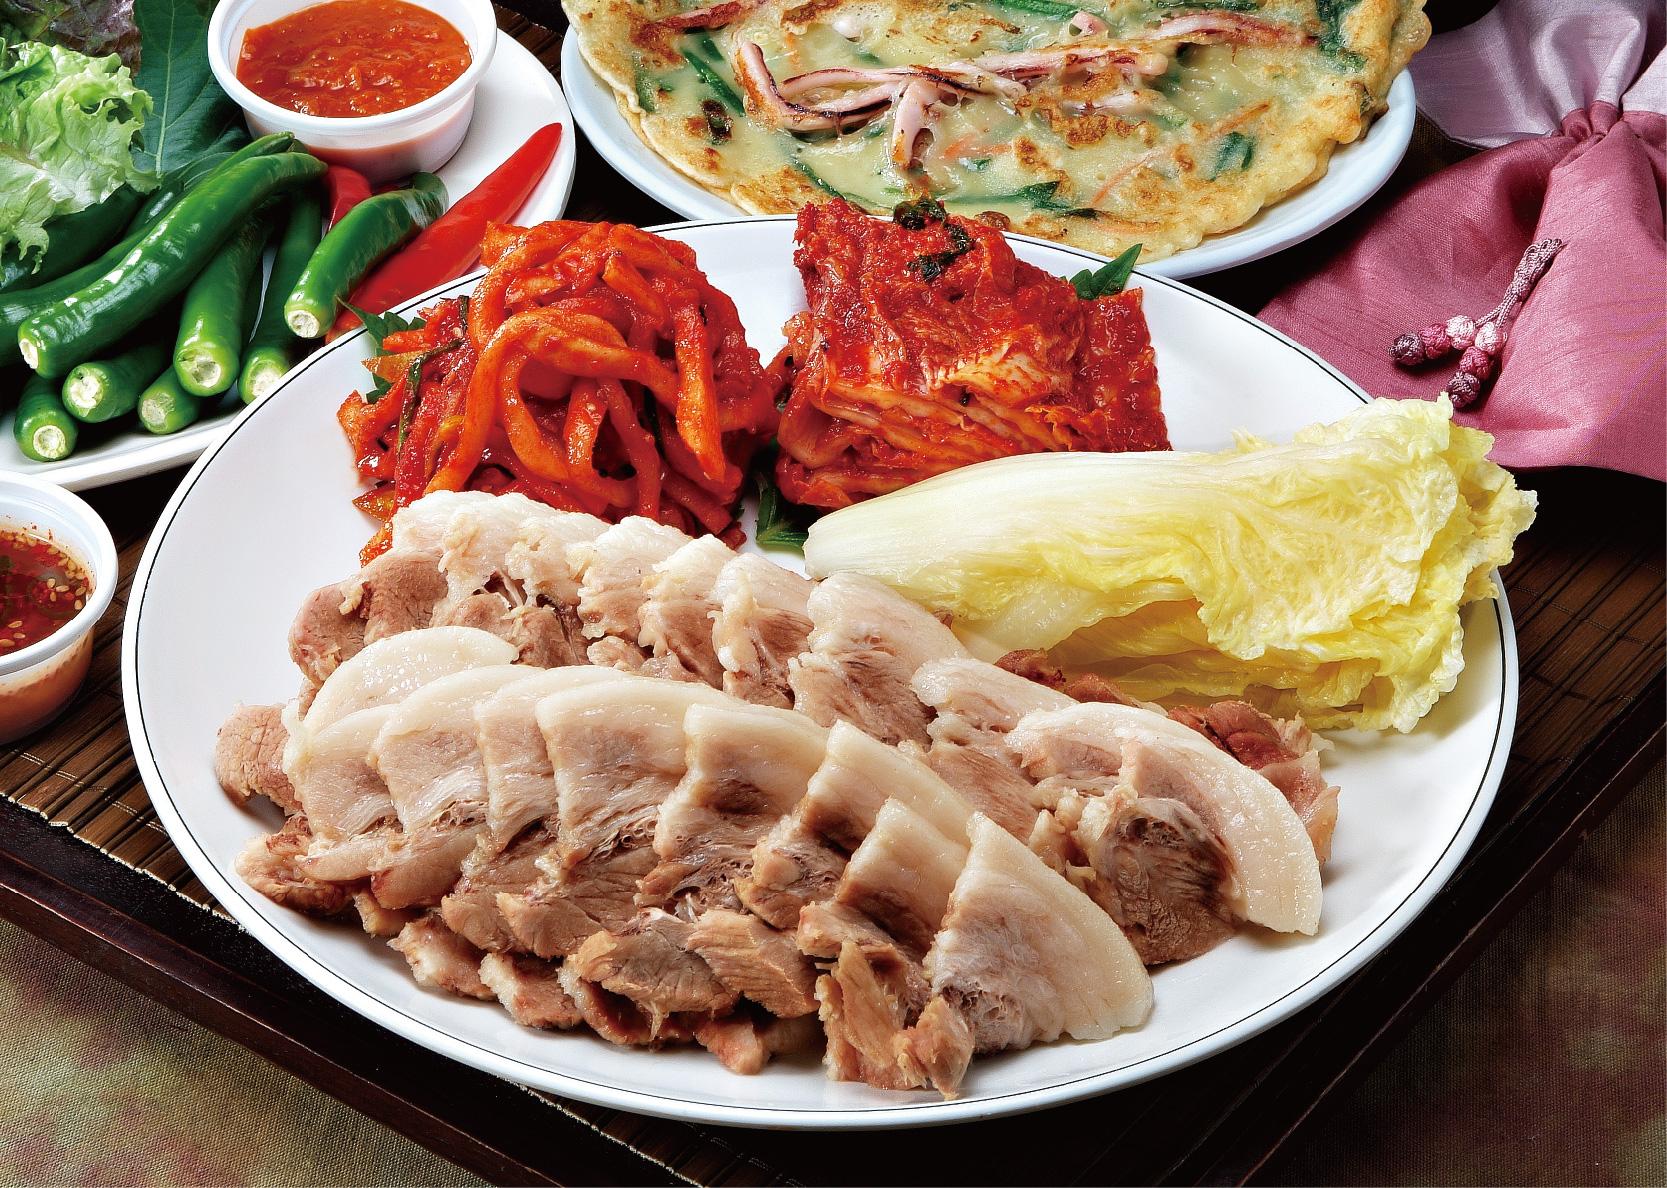 Plate of Korean cuisine featuring jokbal and bossam, available for delivery with tableware and ingredients.